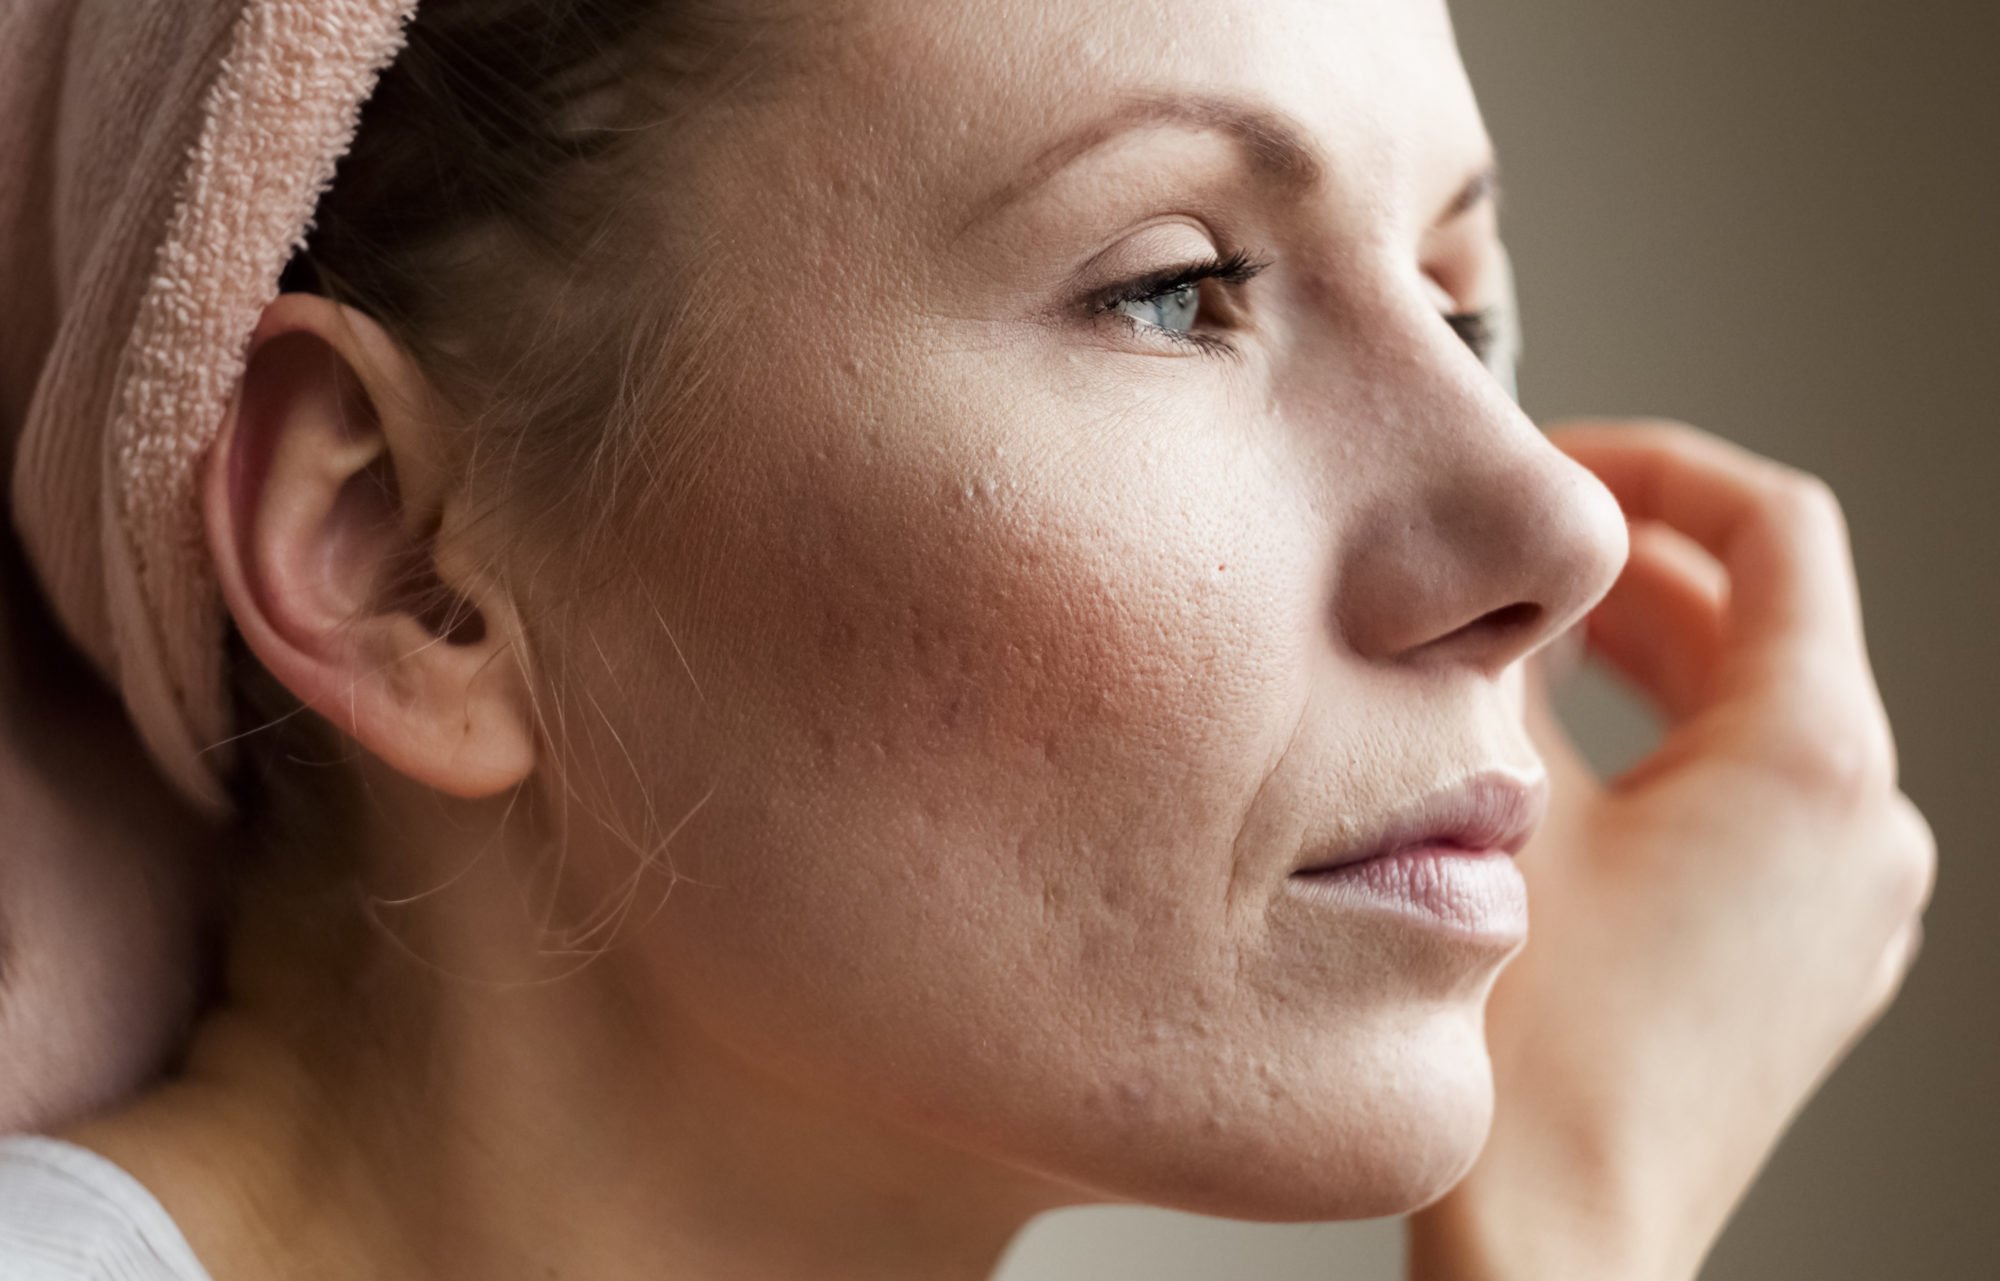 What You Need To Know About Adult Acne